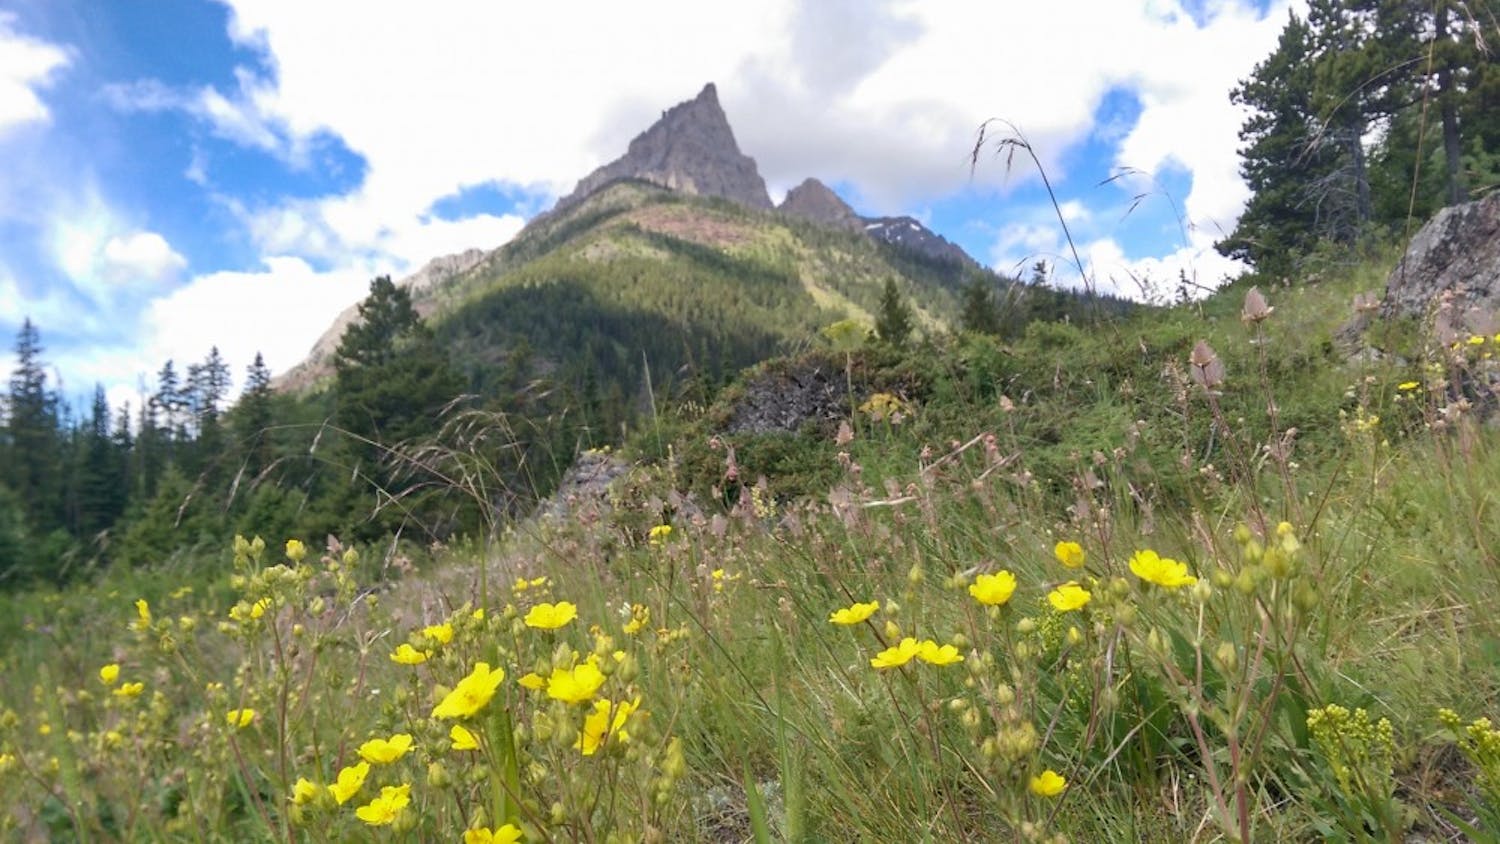 Wildflowers bloom in front of a mountain in&nbsp;Glacier National Park.